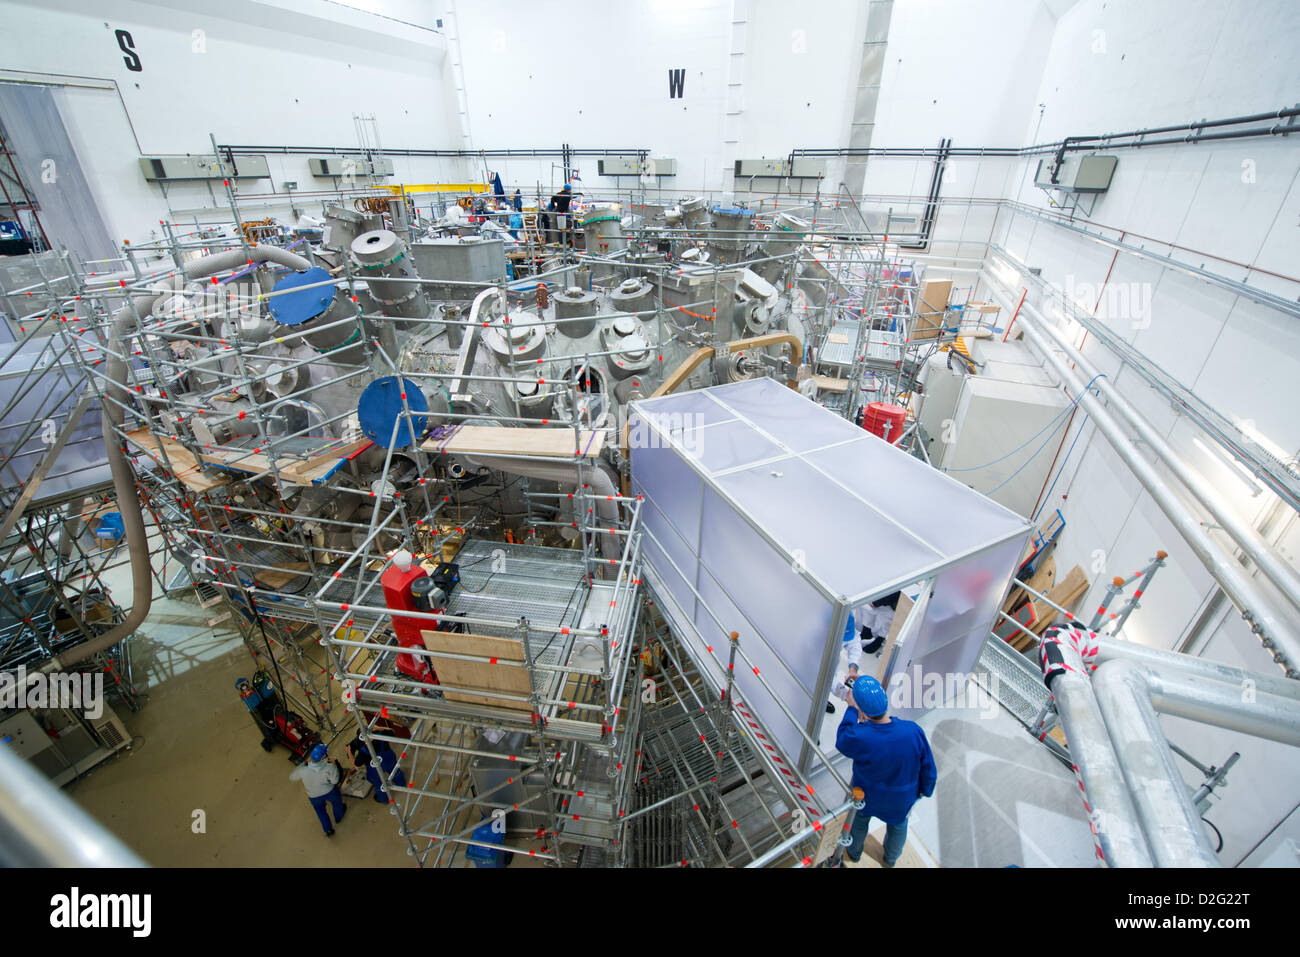 Technicians work on the research reactor 'Wendelstein 7-X' at the Max Planck Institute of Plasma Physics in Greifswald, Germany, 23 January 2013. The reactor will be used for tests on nuclear fusions which are supposed to mirror the processes by which atomic nuclei fuse on the sun and release energy. After environmental protection groups and the green Party voiced security concerns the institute will now operate under the greatest possible transparency. Photo: Stefan Sauer Stock Photo